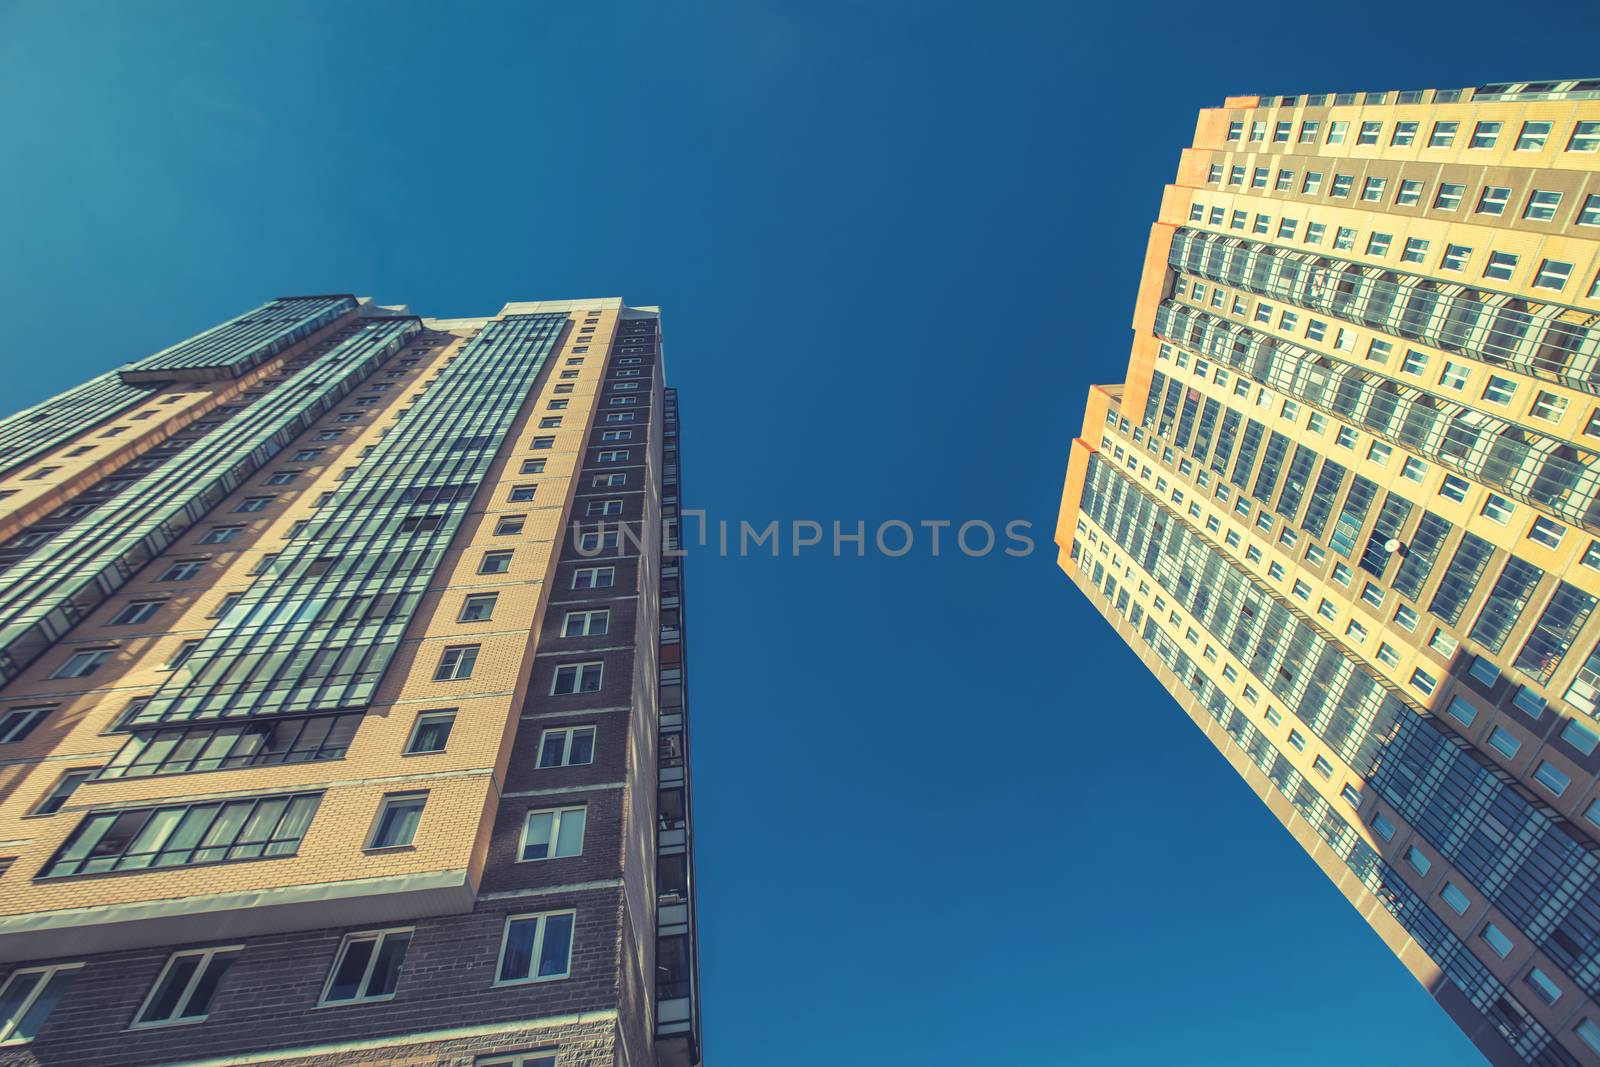 Modern building exterior low angle view with blue sky